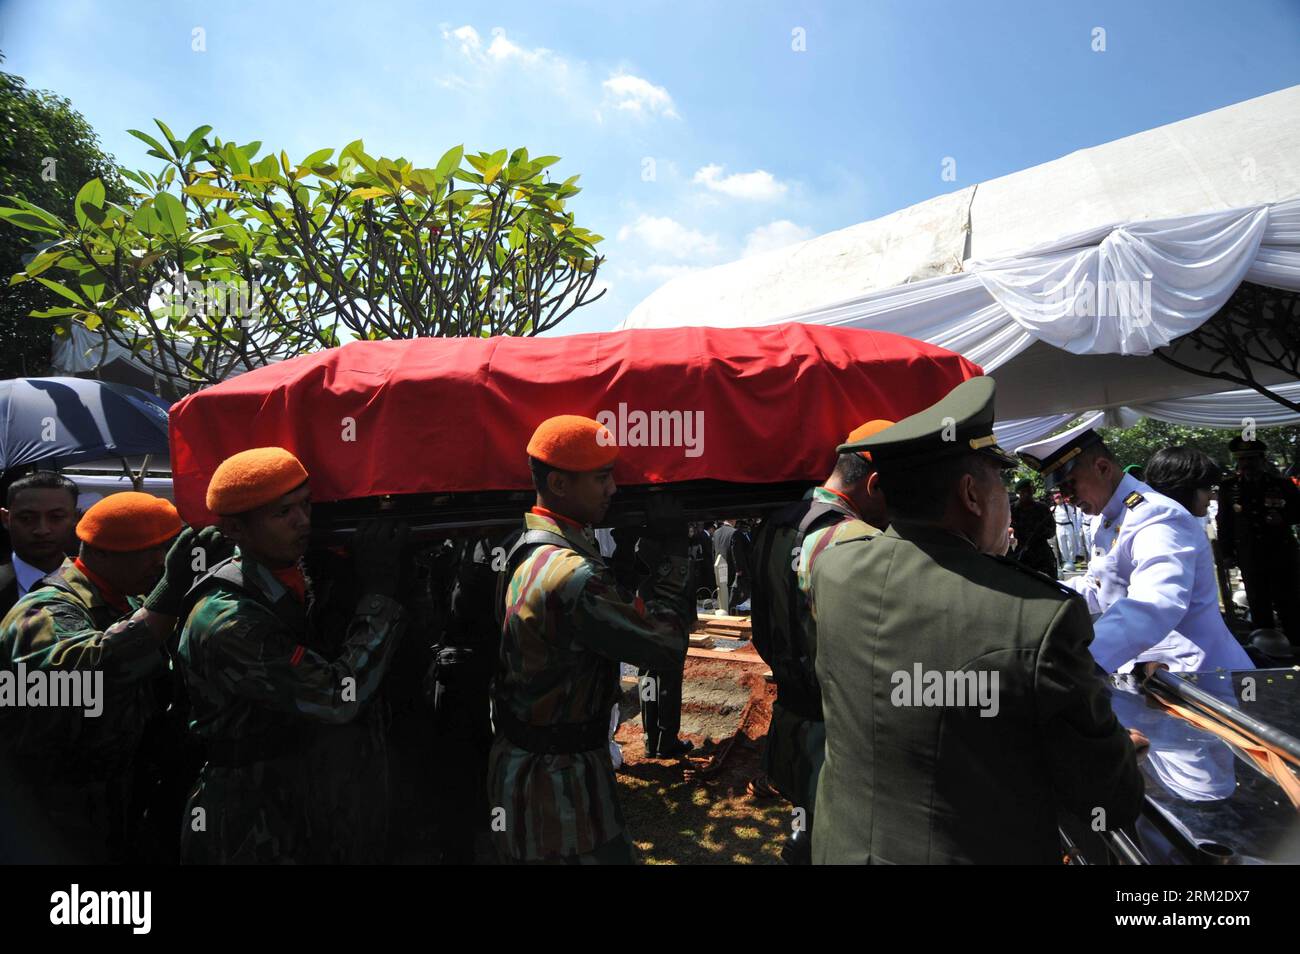 Bildnummer: 59794548  Datum: 09.06.2013  Copyright: imago/Xinhua (130609) -- JAKARTA, June 9, 2013 (Xinhua) -- Soldiers carry the coffin of Taufik Kiemas, chairman of the Indonesian People s Consultative Assembly and husband of former Indonesian President Megawati Sukarnoputri, during an official burial ceremony at Kalibata national heroes cemetery in Jakarta, Indonesia, June 9, 2013. Taufik Kiemas died at a Singapore hospital Saturday evening. (Xinhua/Agung Kuncahya B.) INDONESIA-JAKARTA-TAUFIK KIEMAS-FUNERAL PUBLICATIONxNOTxINxCHN People Politik Beerdigung Trauerfeier xcb x0x 2013 quer premi Stock Photo